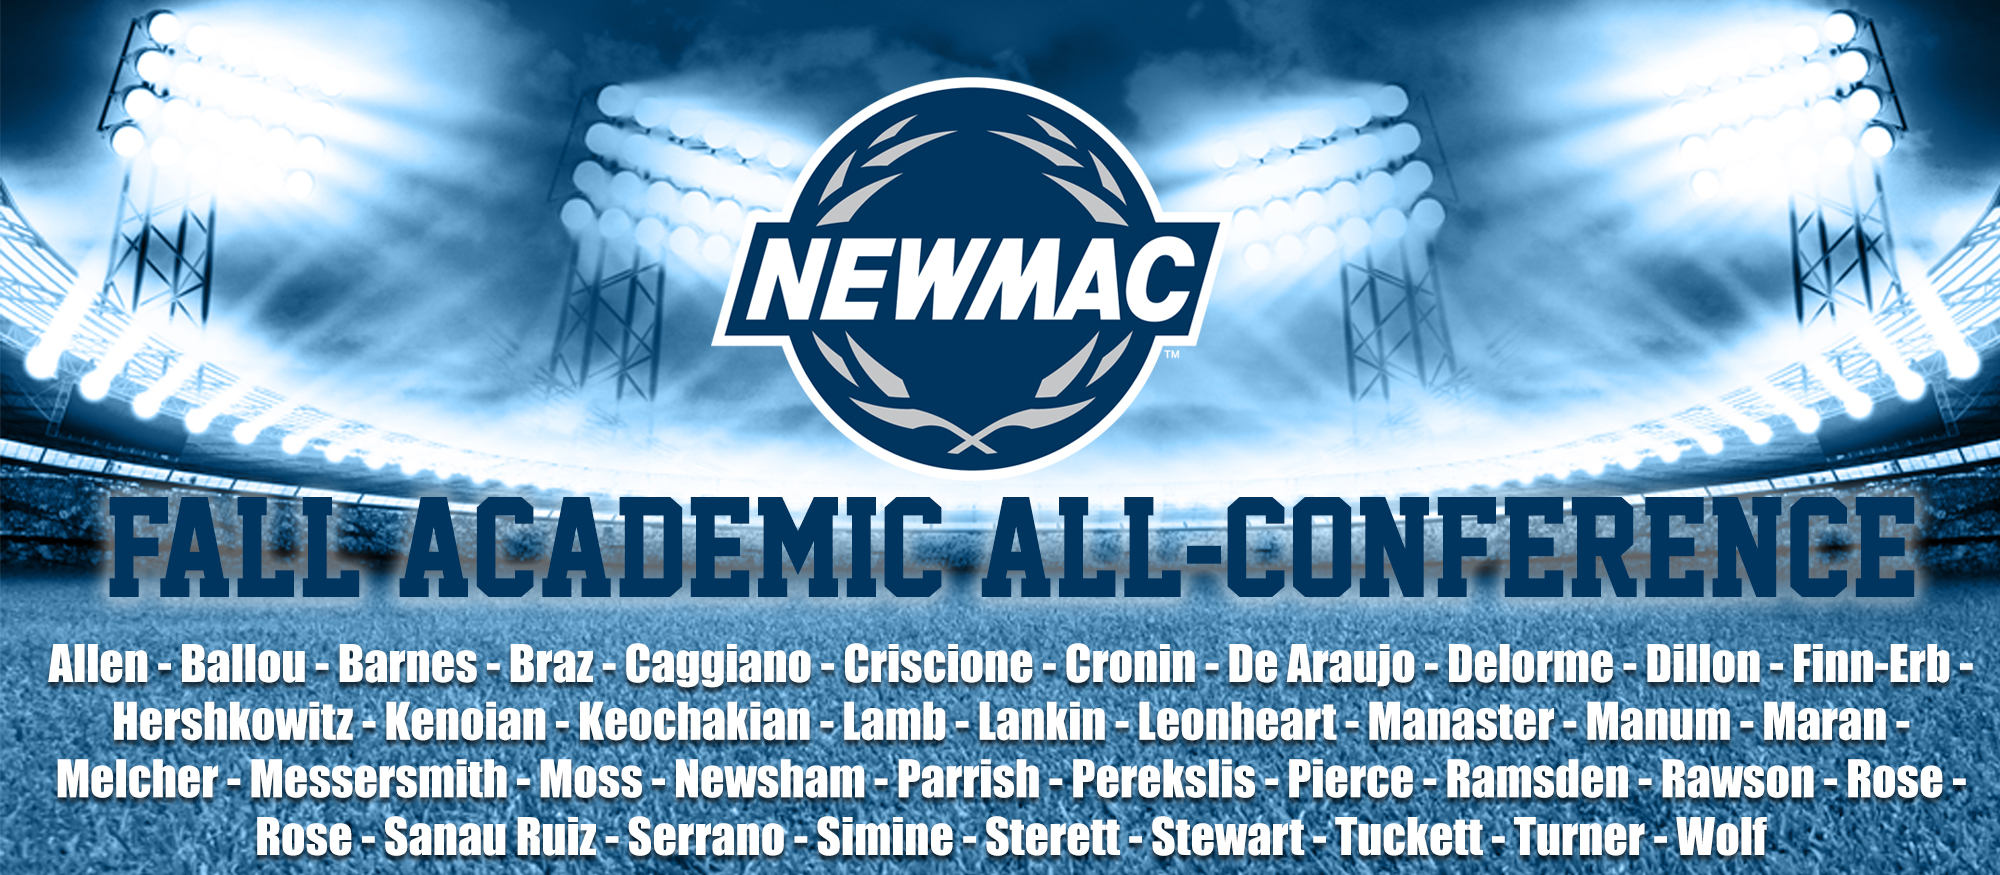 Graphic promoting the 39 student-athletes from cross country, field hockey, soccer and volleyball that were named to the 2017 NEWMAC Fall Academic All-Conference Team.